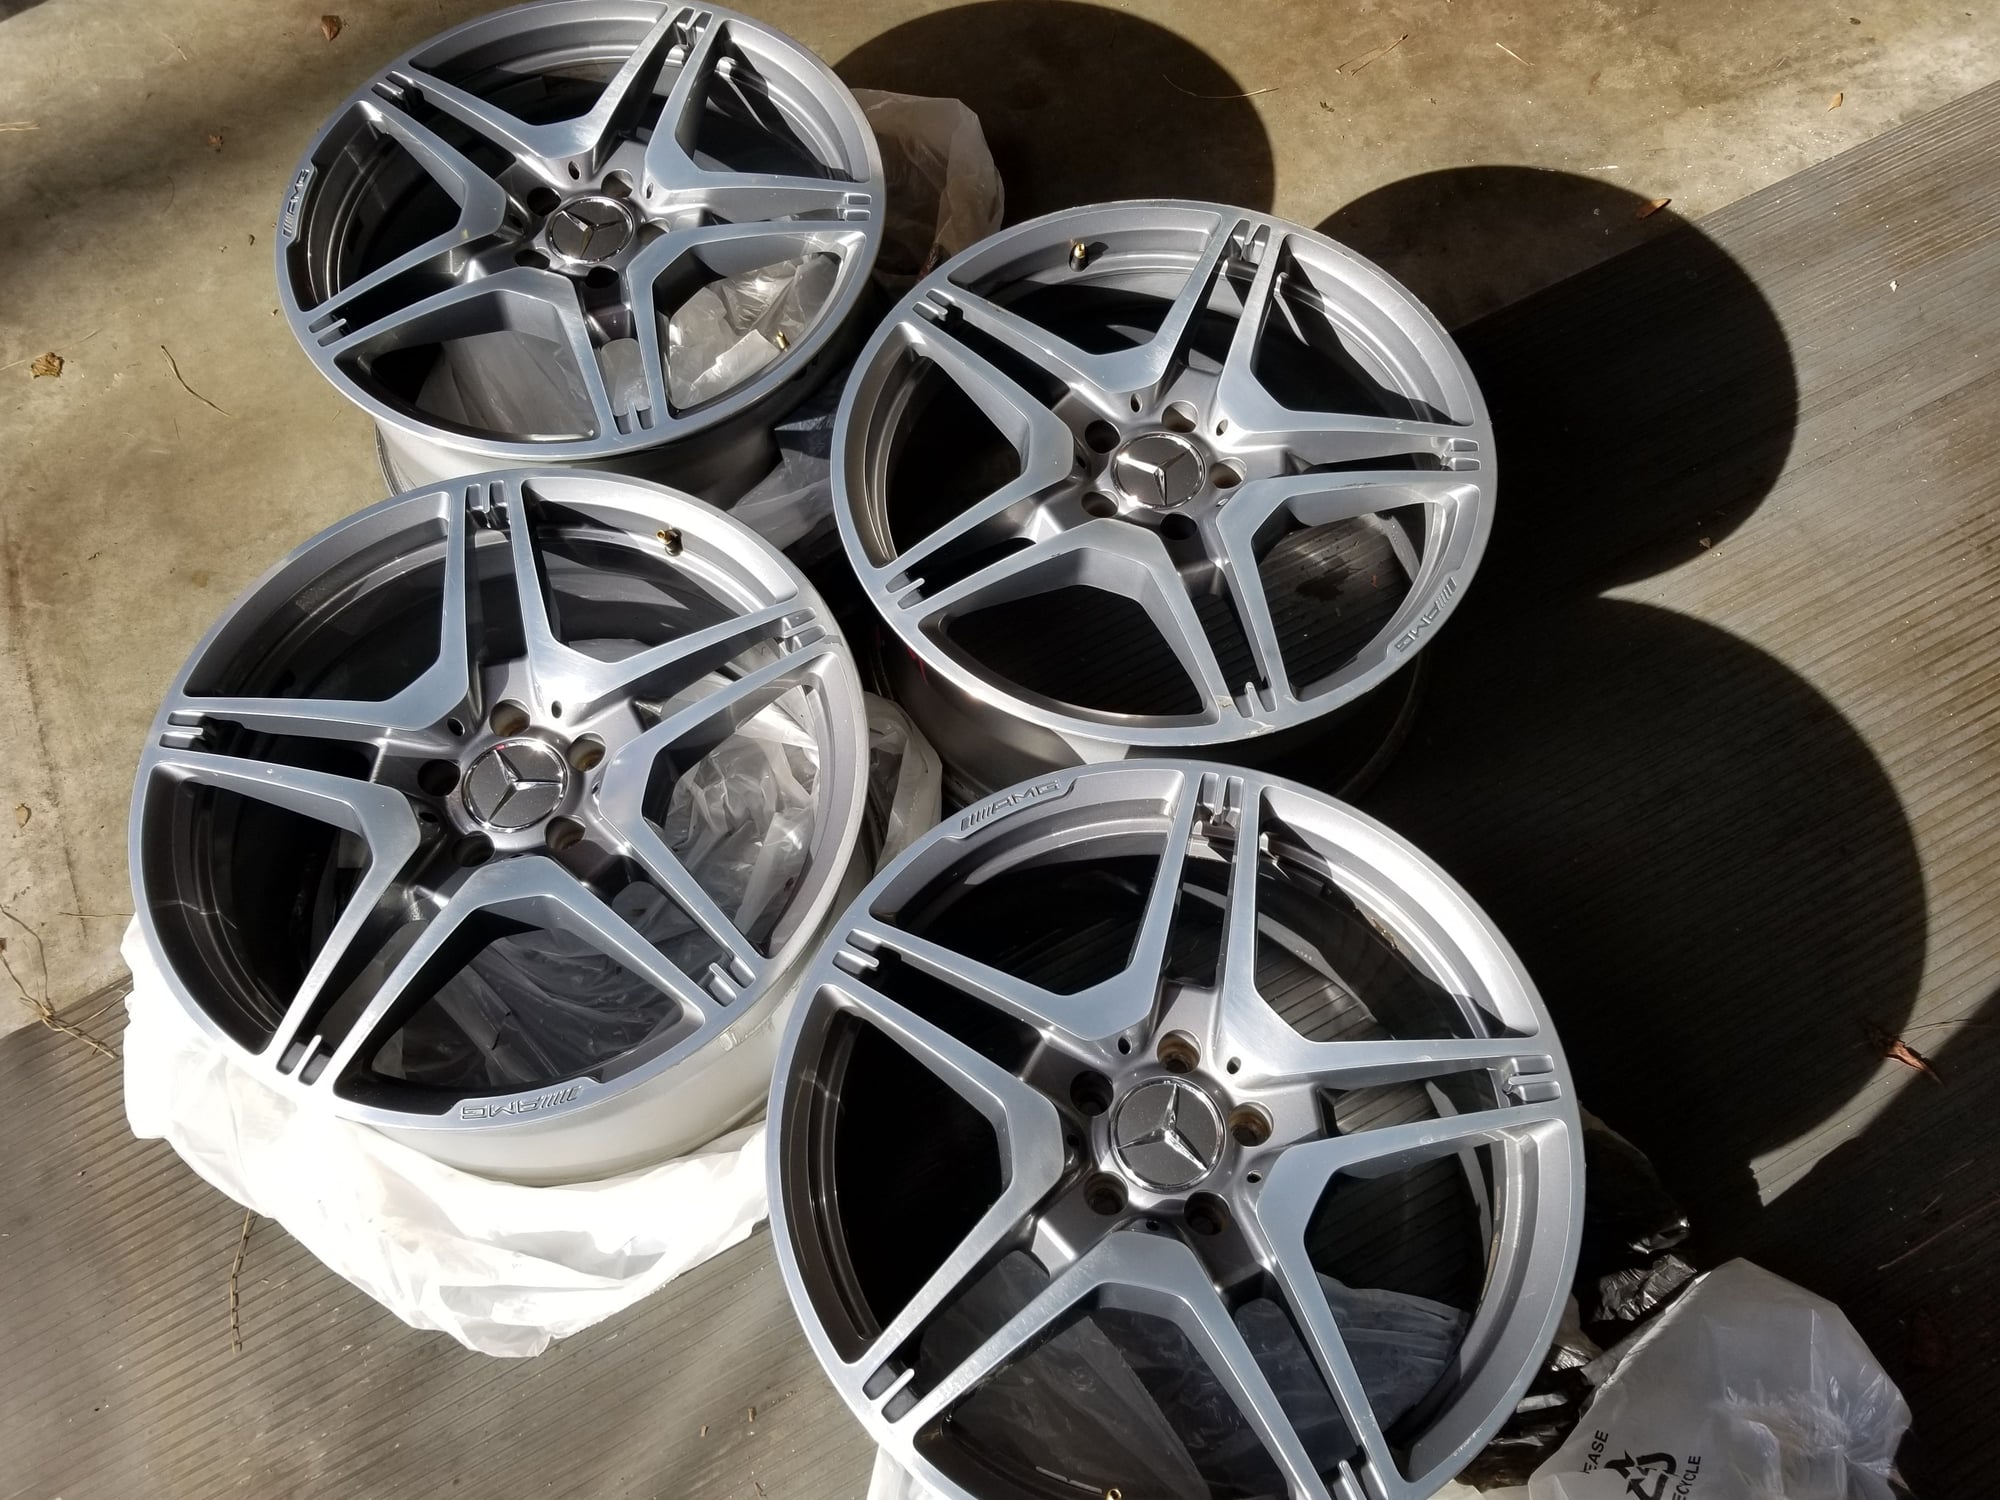 Wheels and Tires/Axles - 212 E63 OE wheels - Used - 2010 to 2013 Mercedes-Benz E63 AMG - Macon, GA 31204, United States